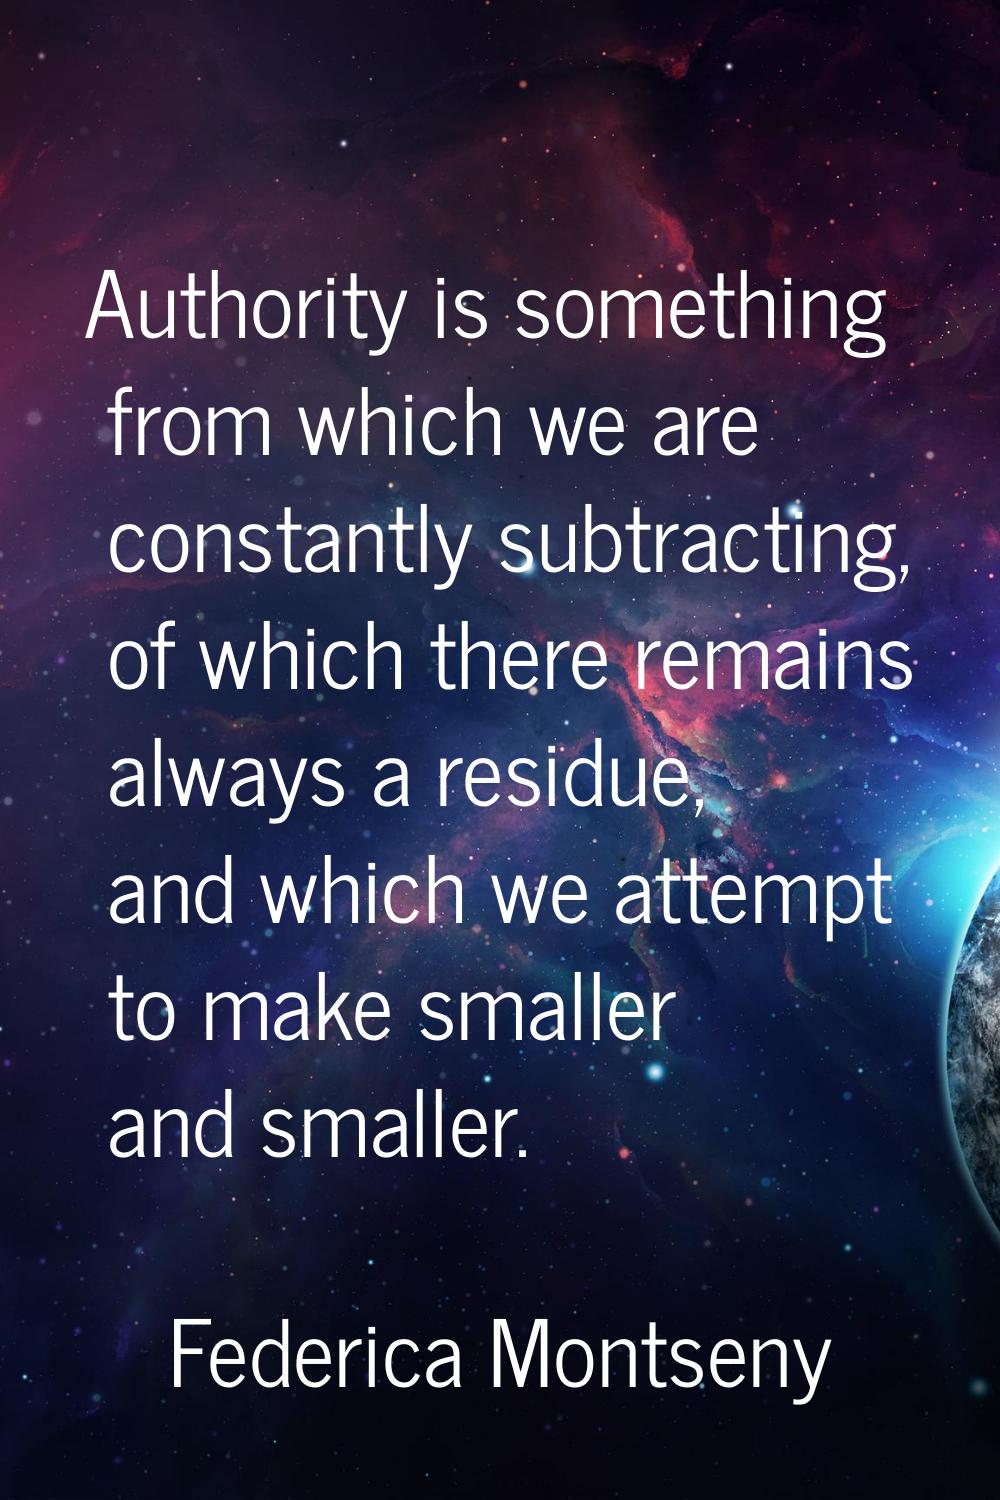 Authority is something from which we are constantly subtracting, of which there remains always a re